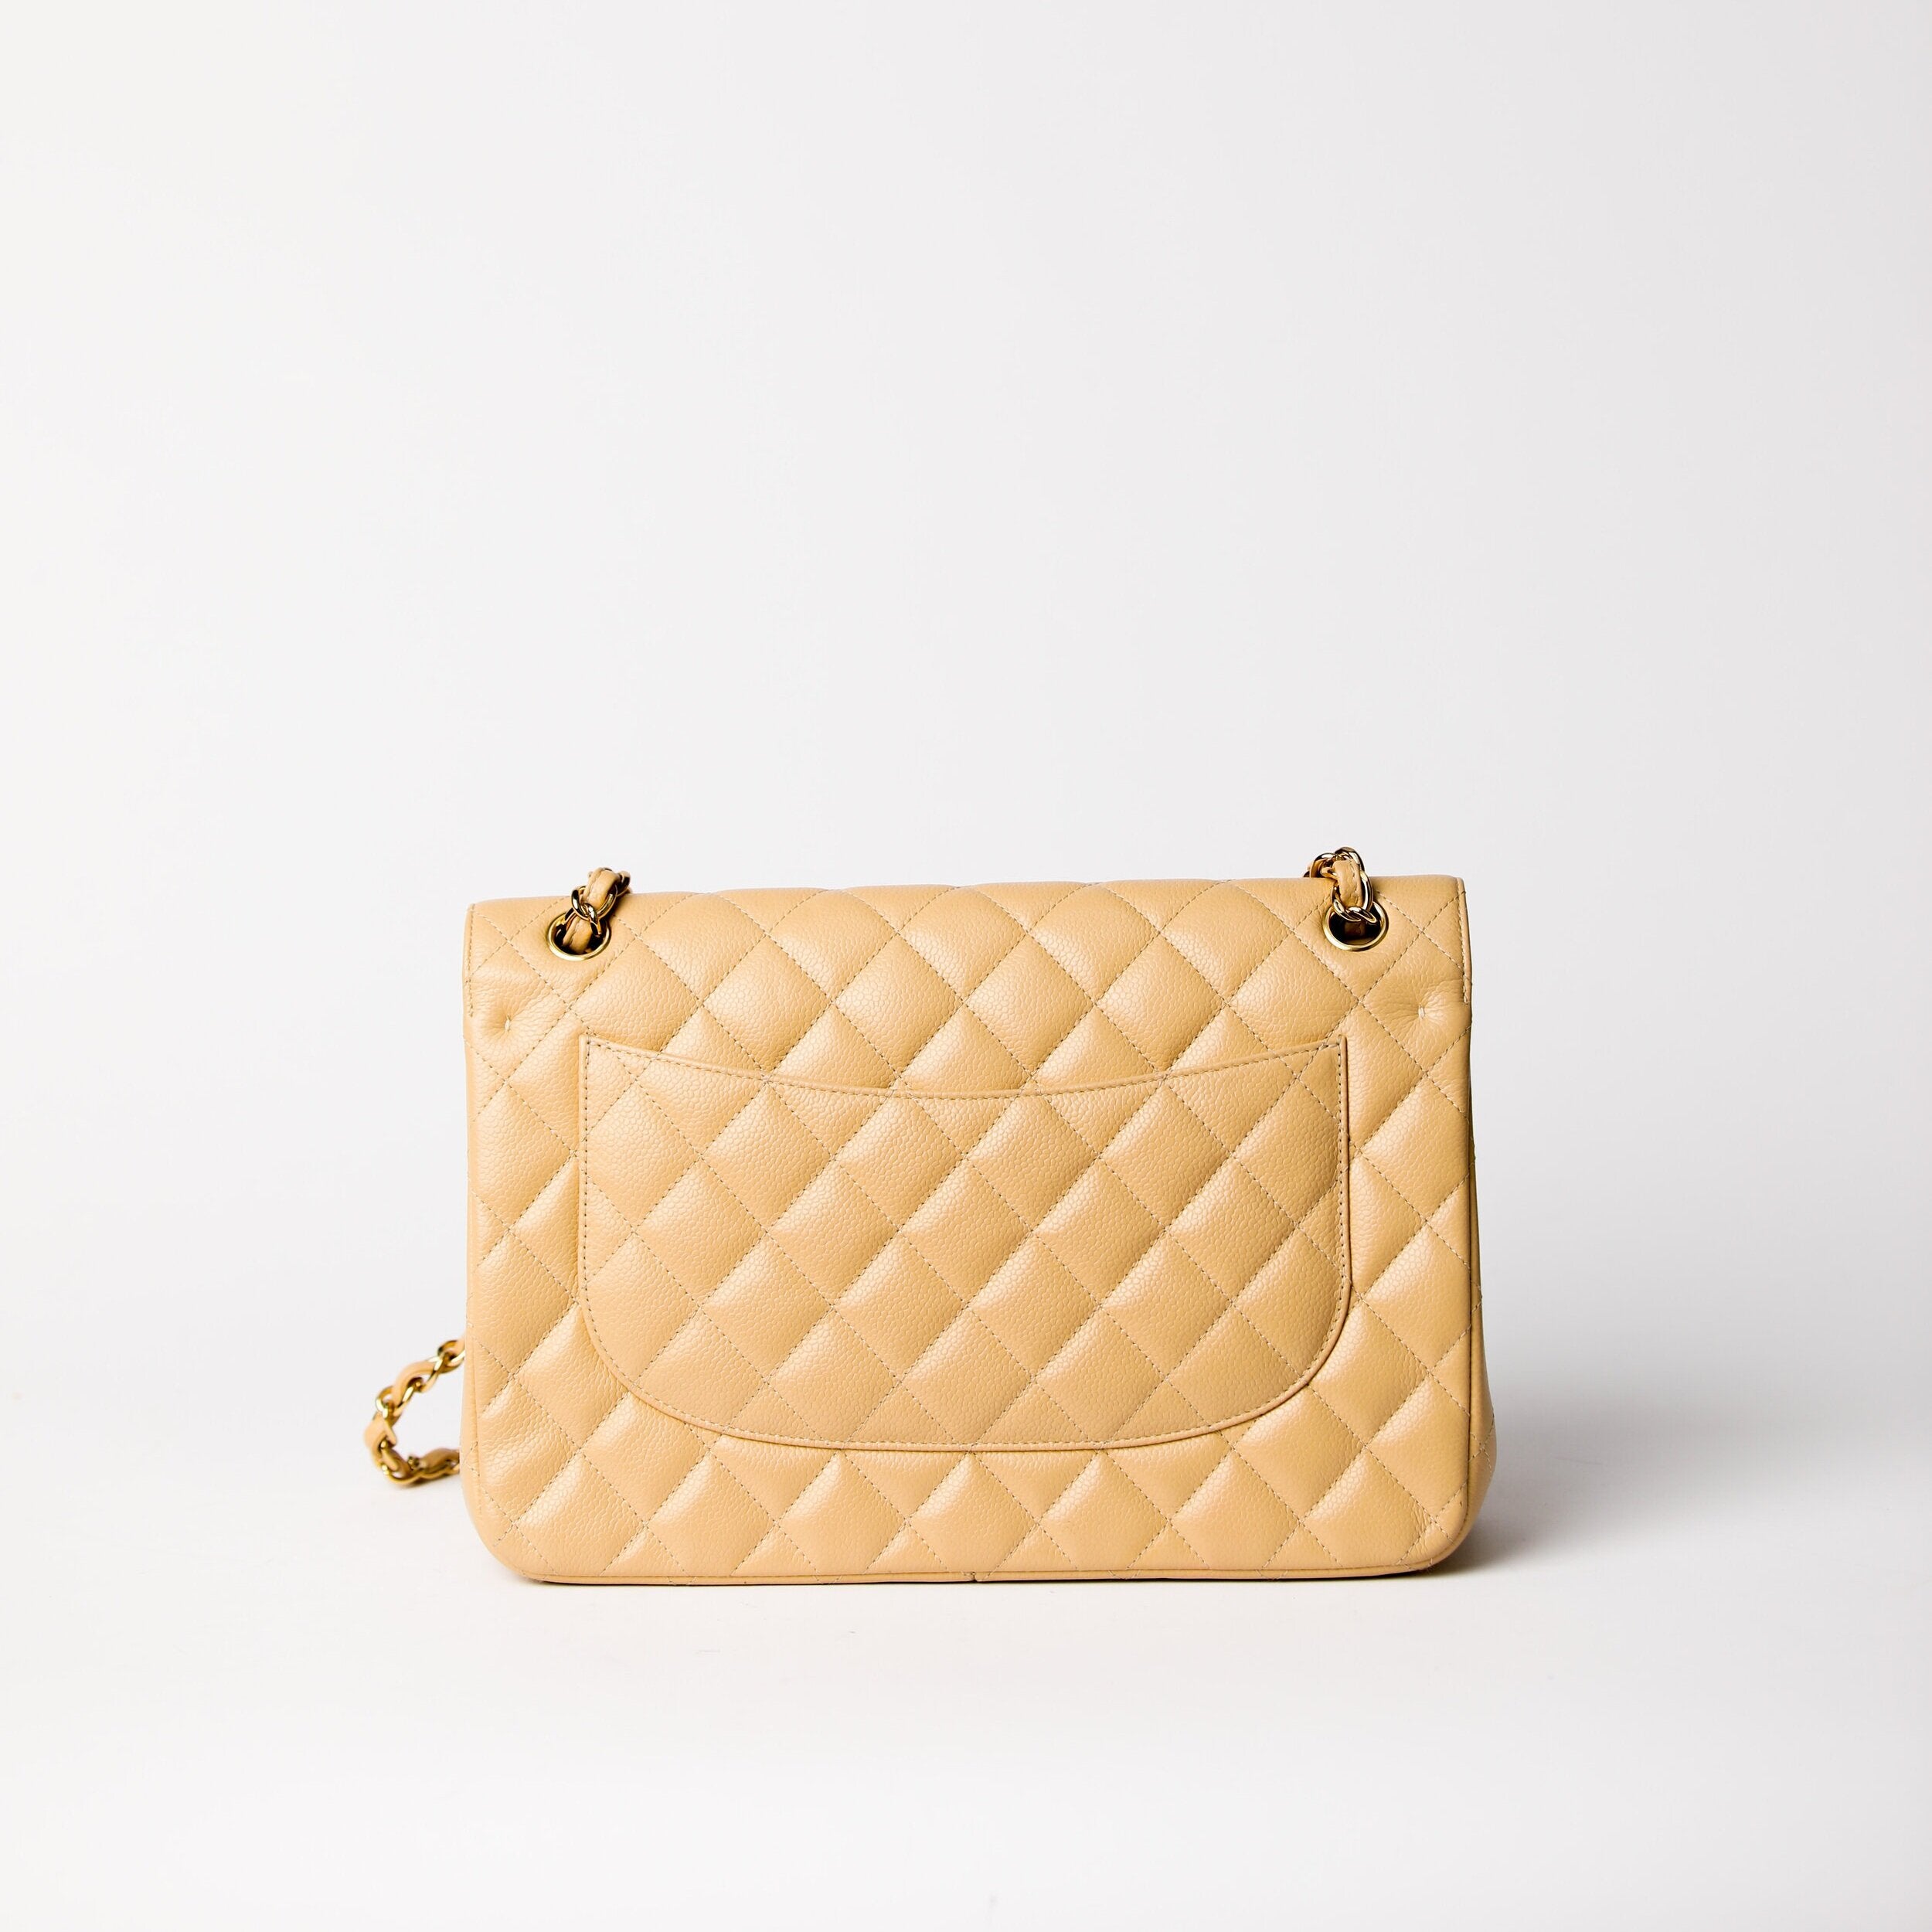 Chanel Beige Quilted Patent Leather Jumbo Classic Double Flap Bag Chanel |  The Luxury Closet